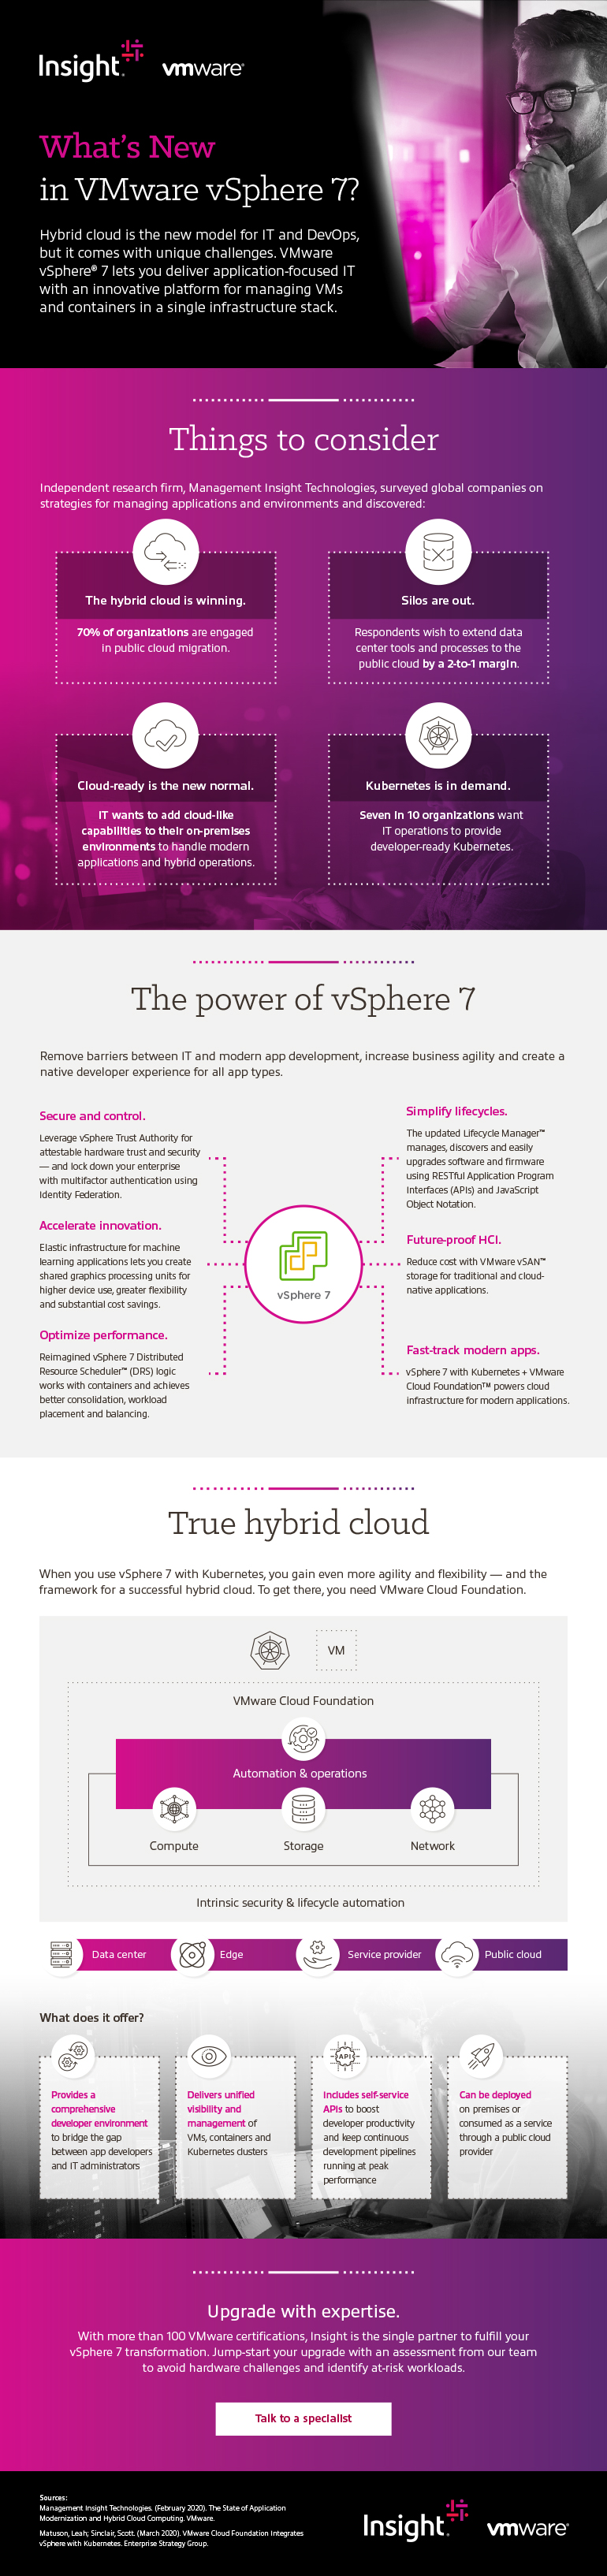 What’s New in VMware vSphere 7 infographic